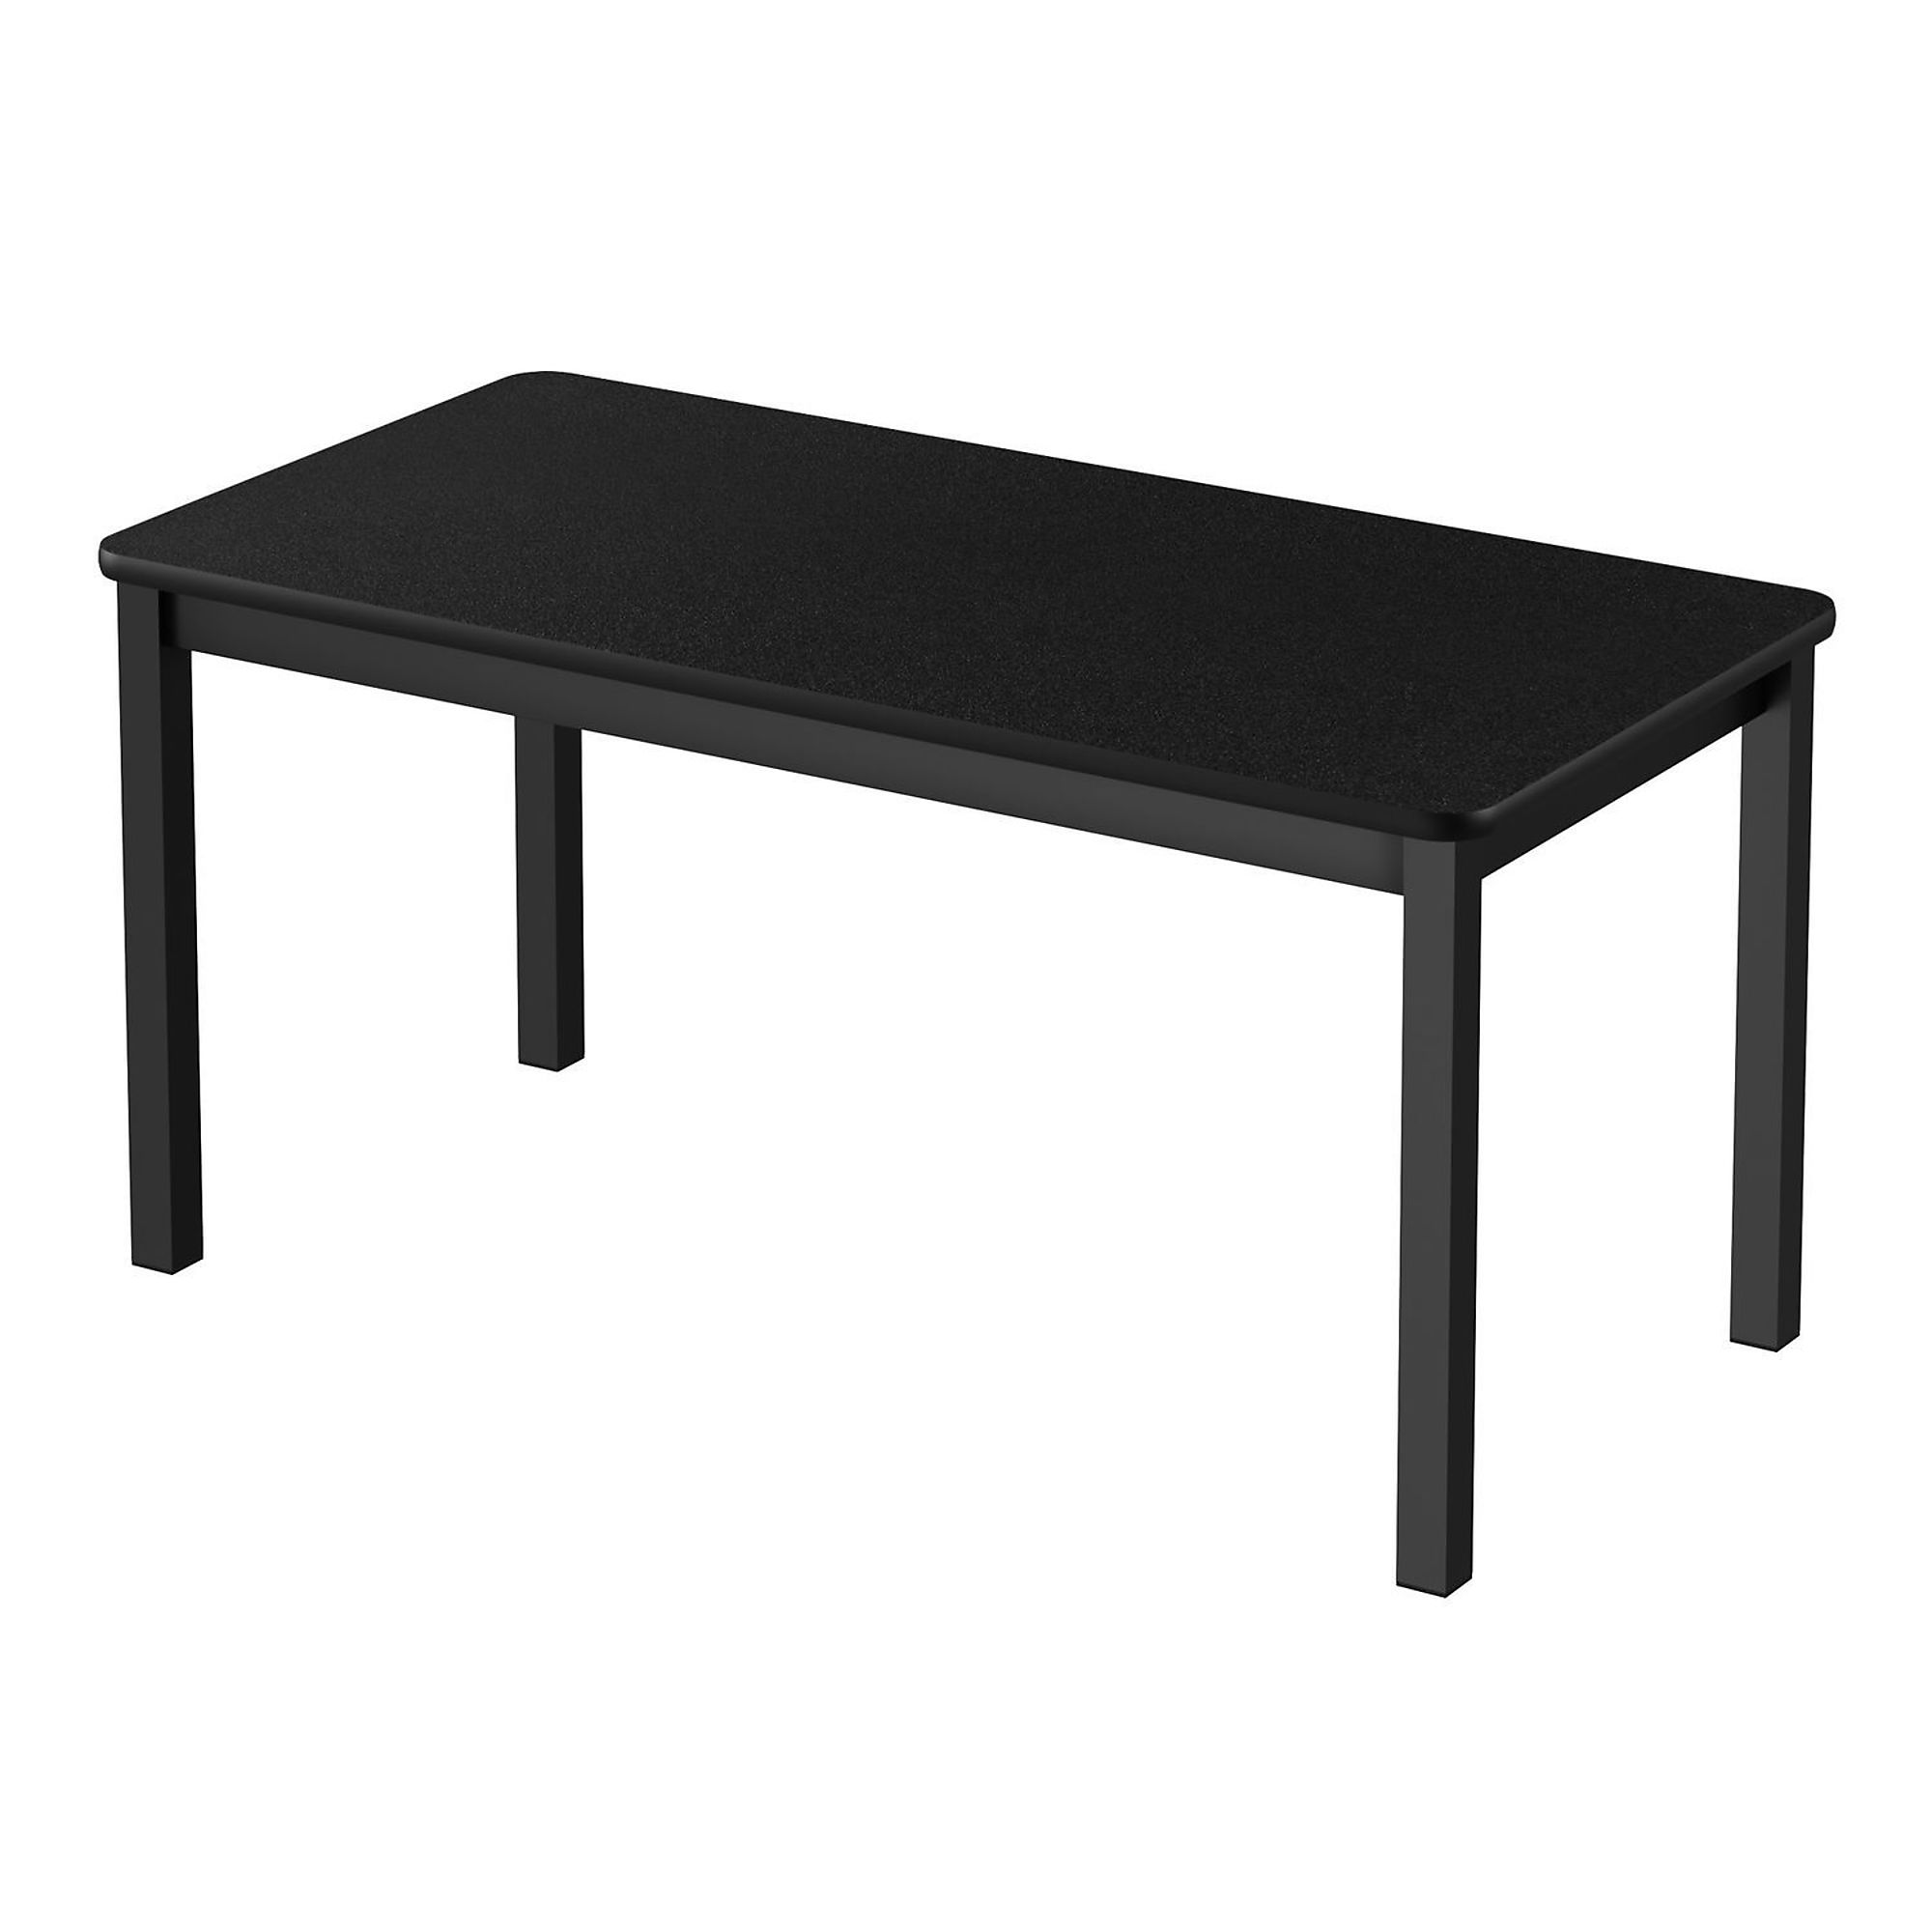 Correll, TFL Library Table, Black Granite, 36x72 Height 29 in, Width 36 in, Length 72 in, Model LR3672TF-07